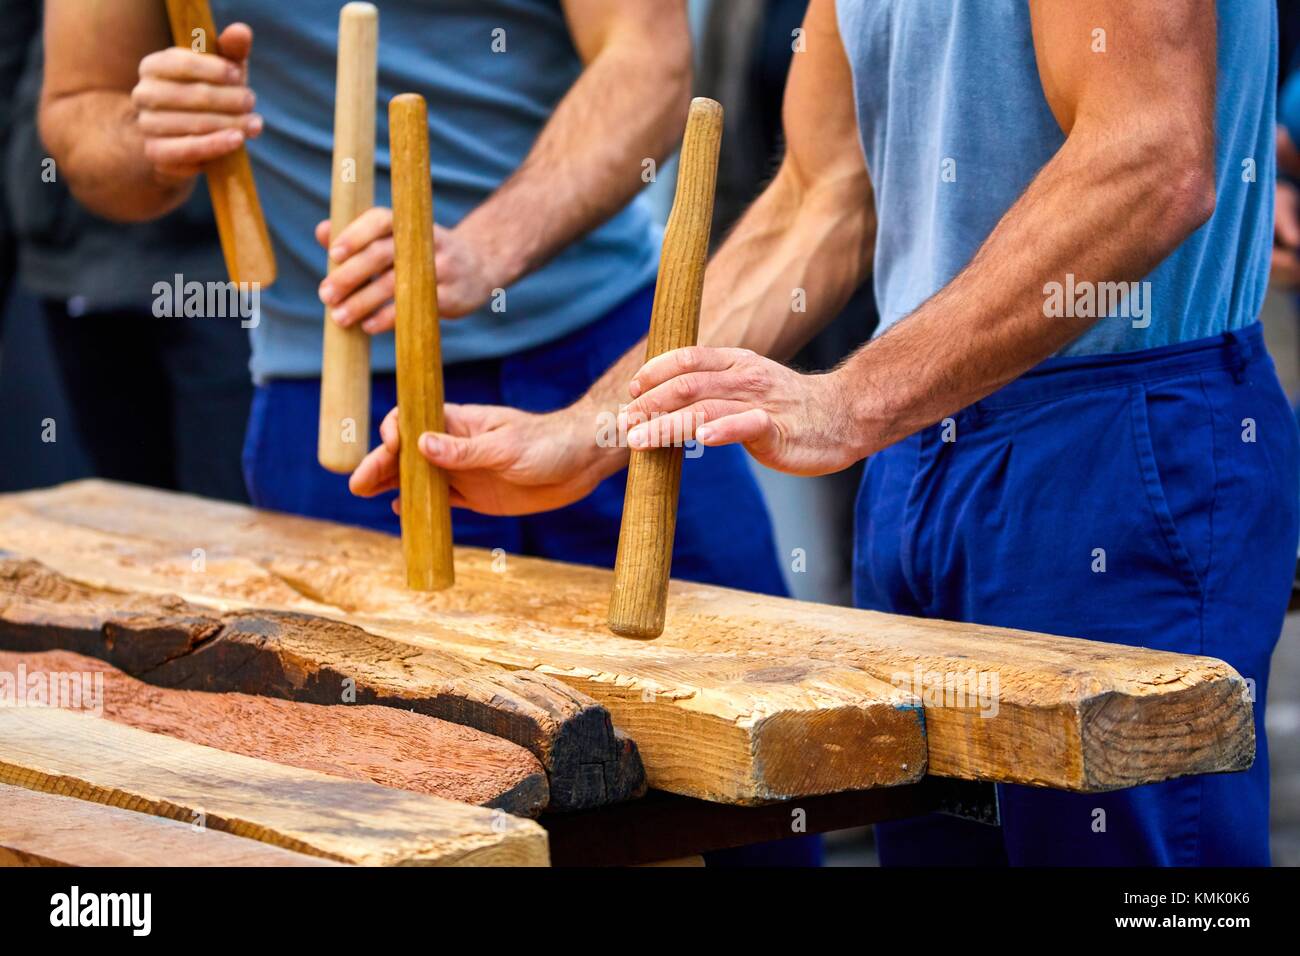 Txalaparta (Basque typical wooden percussion instrument), Feria de Santo  Tomás, The feast of St. Thomas takes place on December 21. During this day  Stock Photo - Alamy